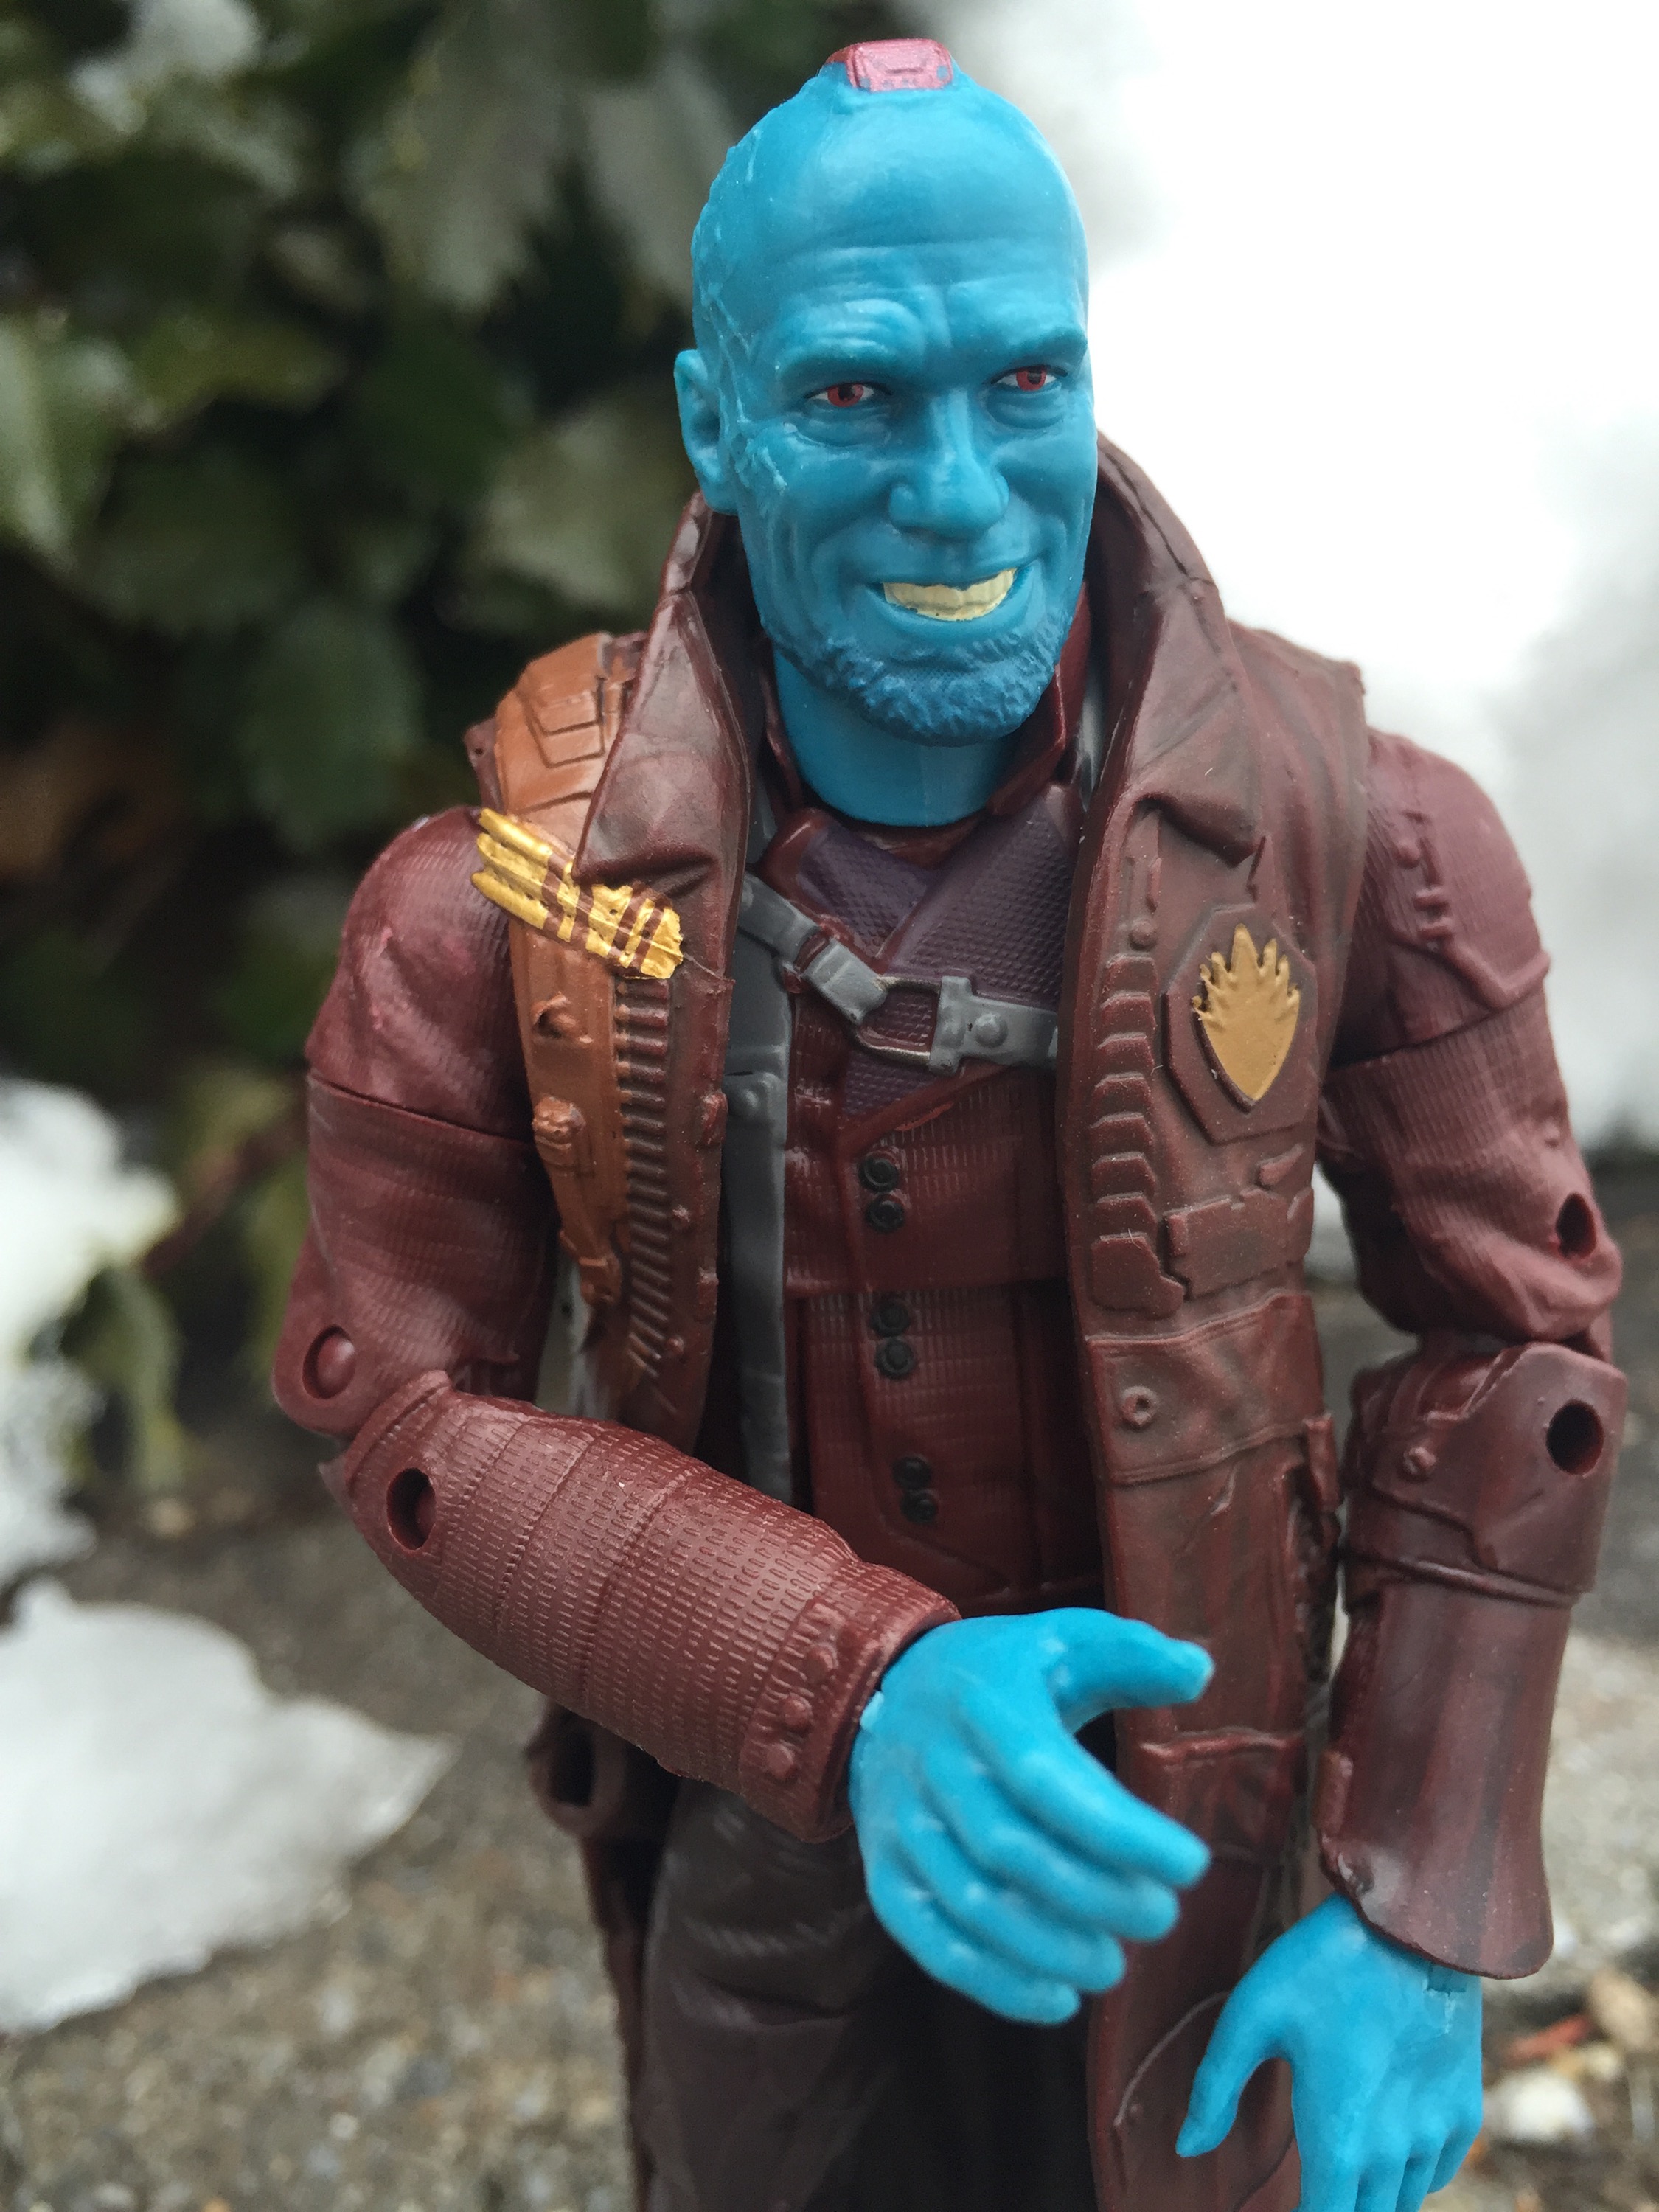 guardians of galaxy one in a million you review